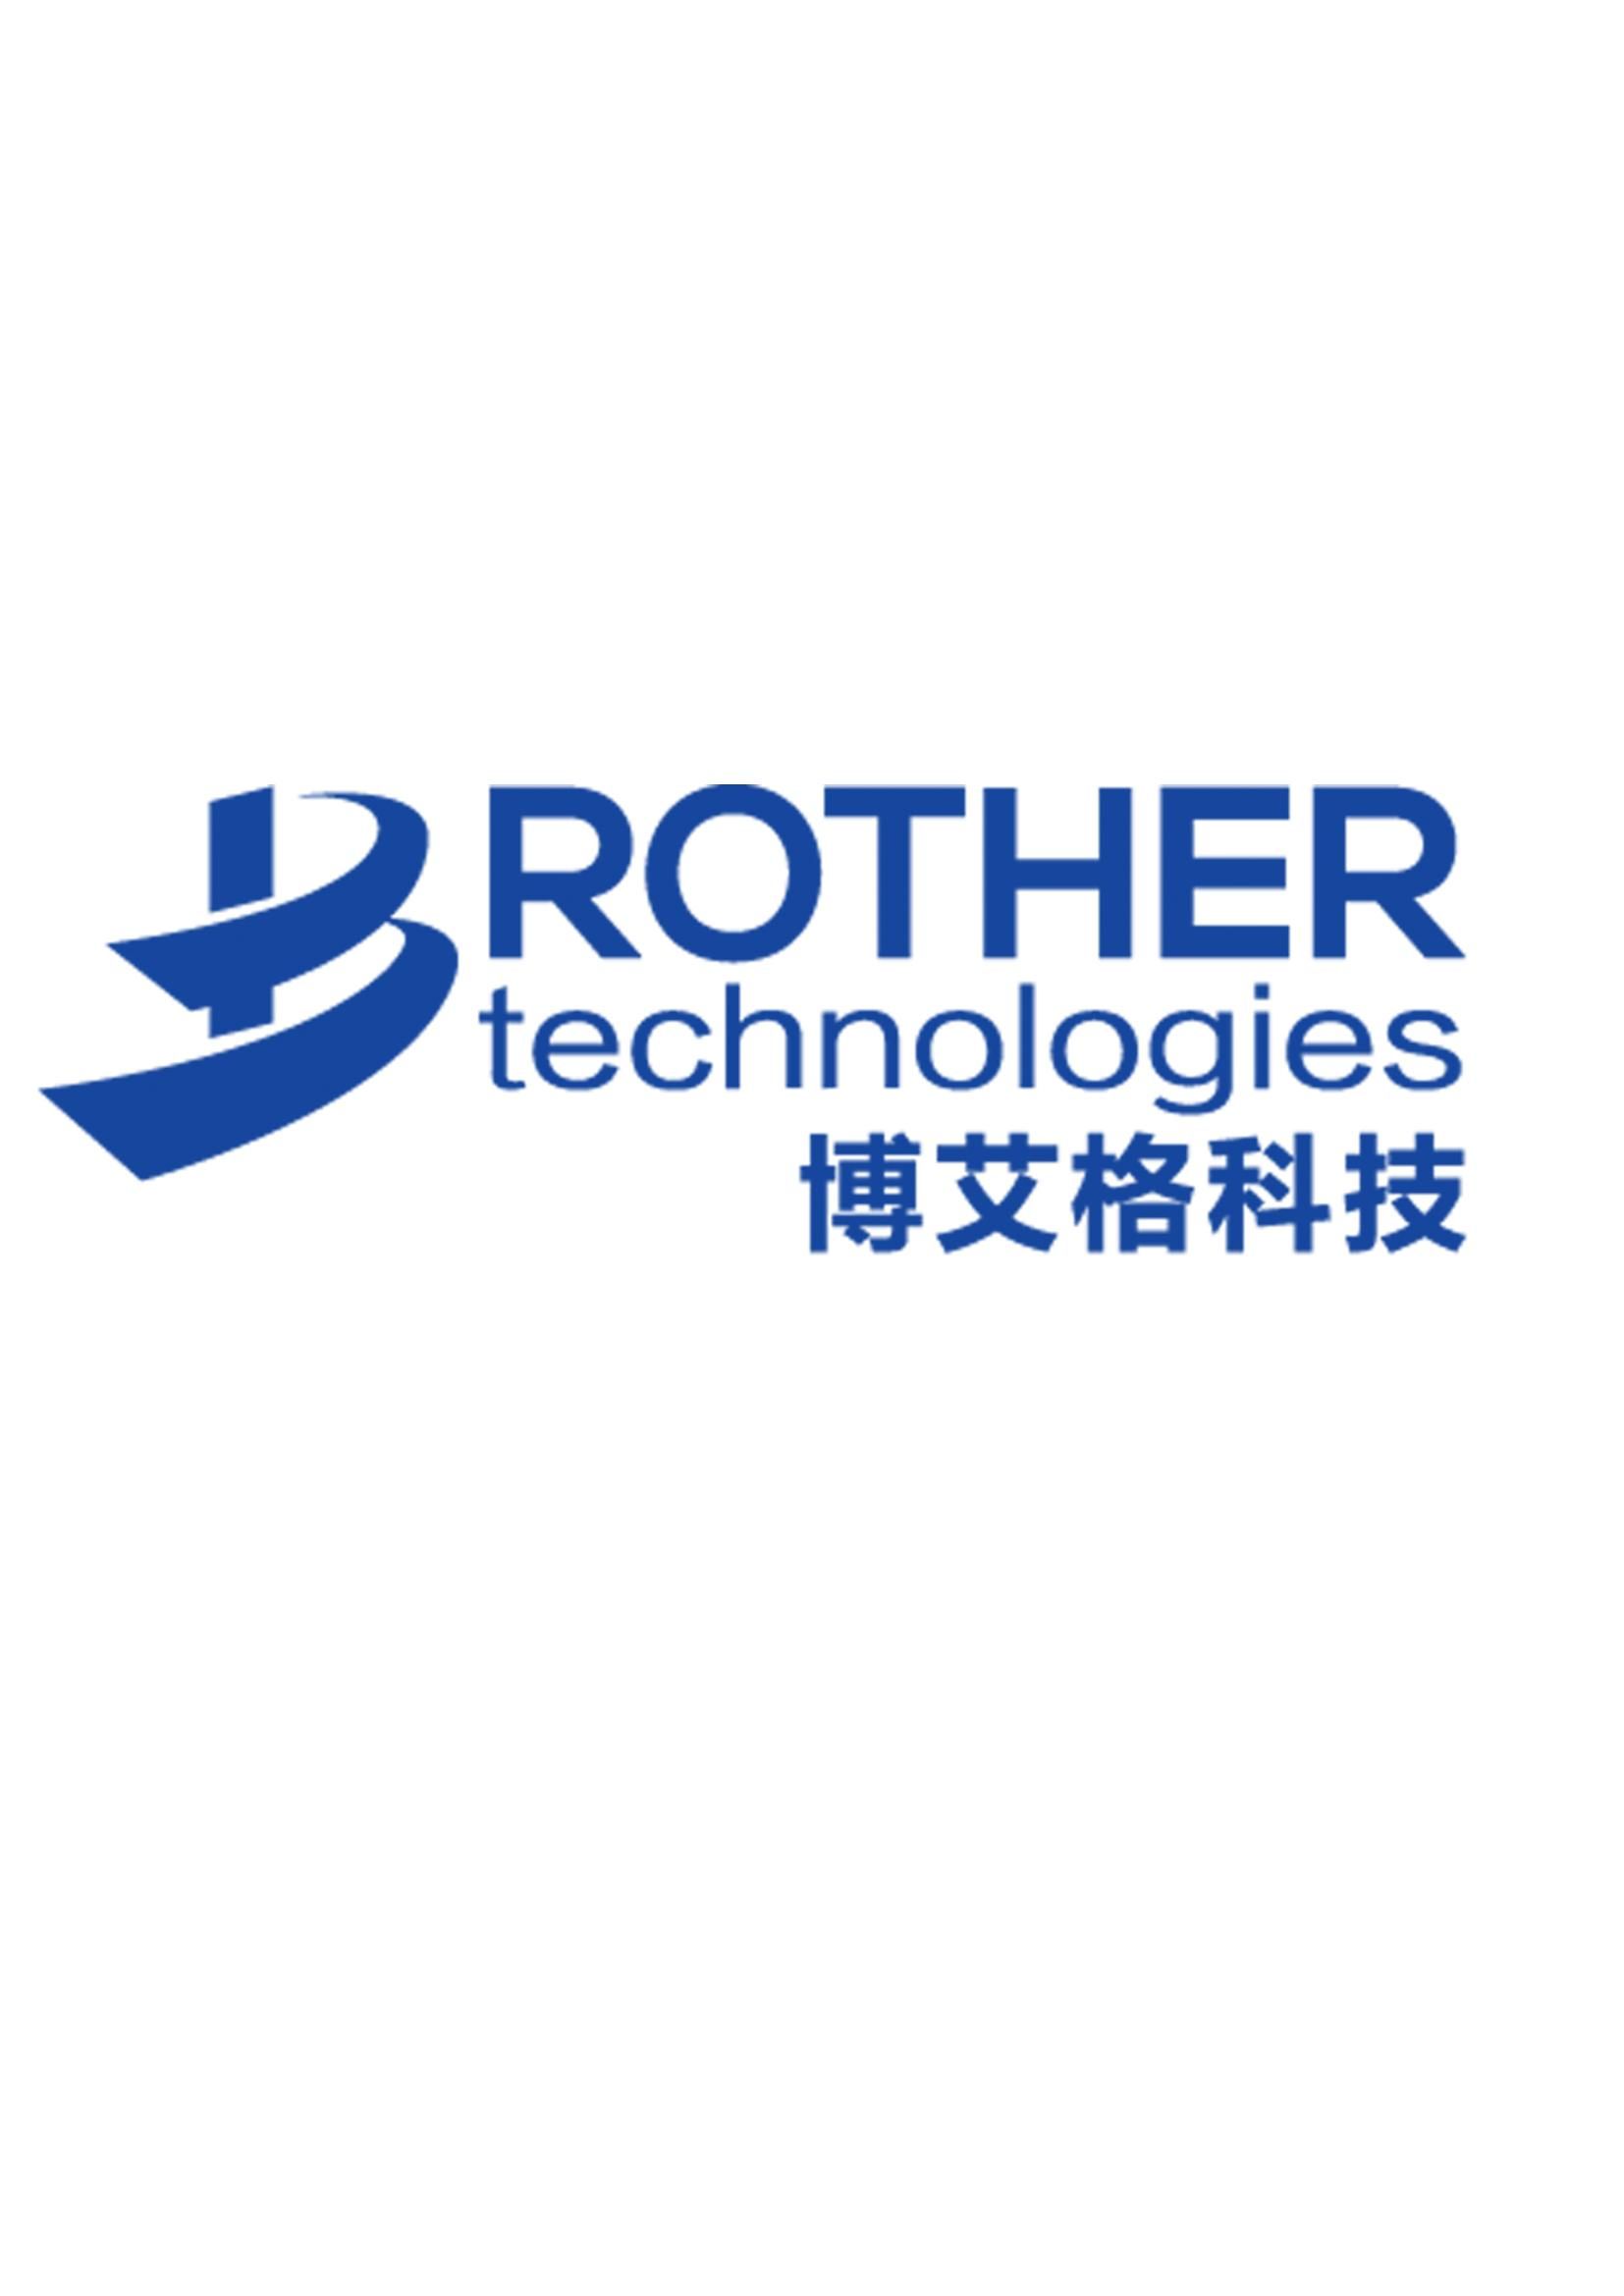 LIAONING BROTHER ELECTRONICS TECHNOLOGY CO., LTD